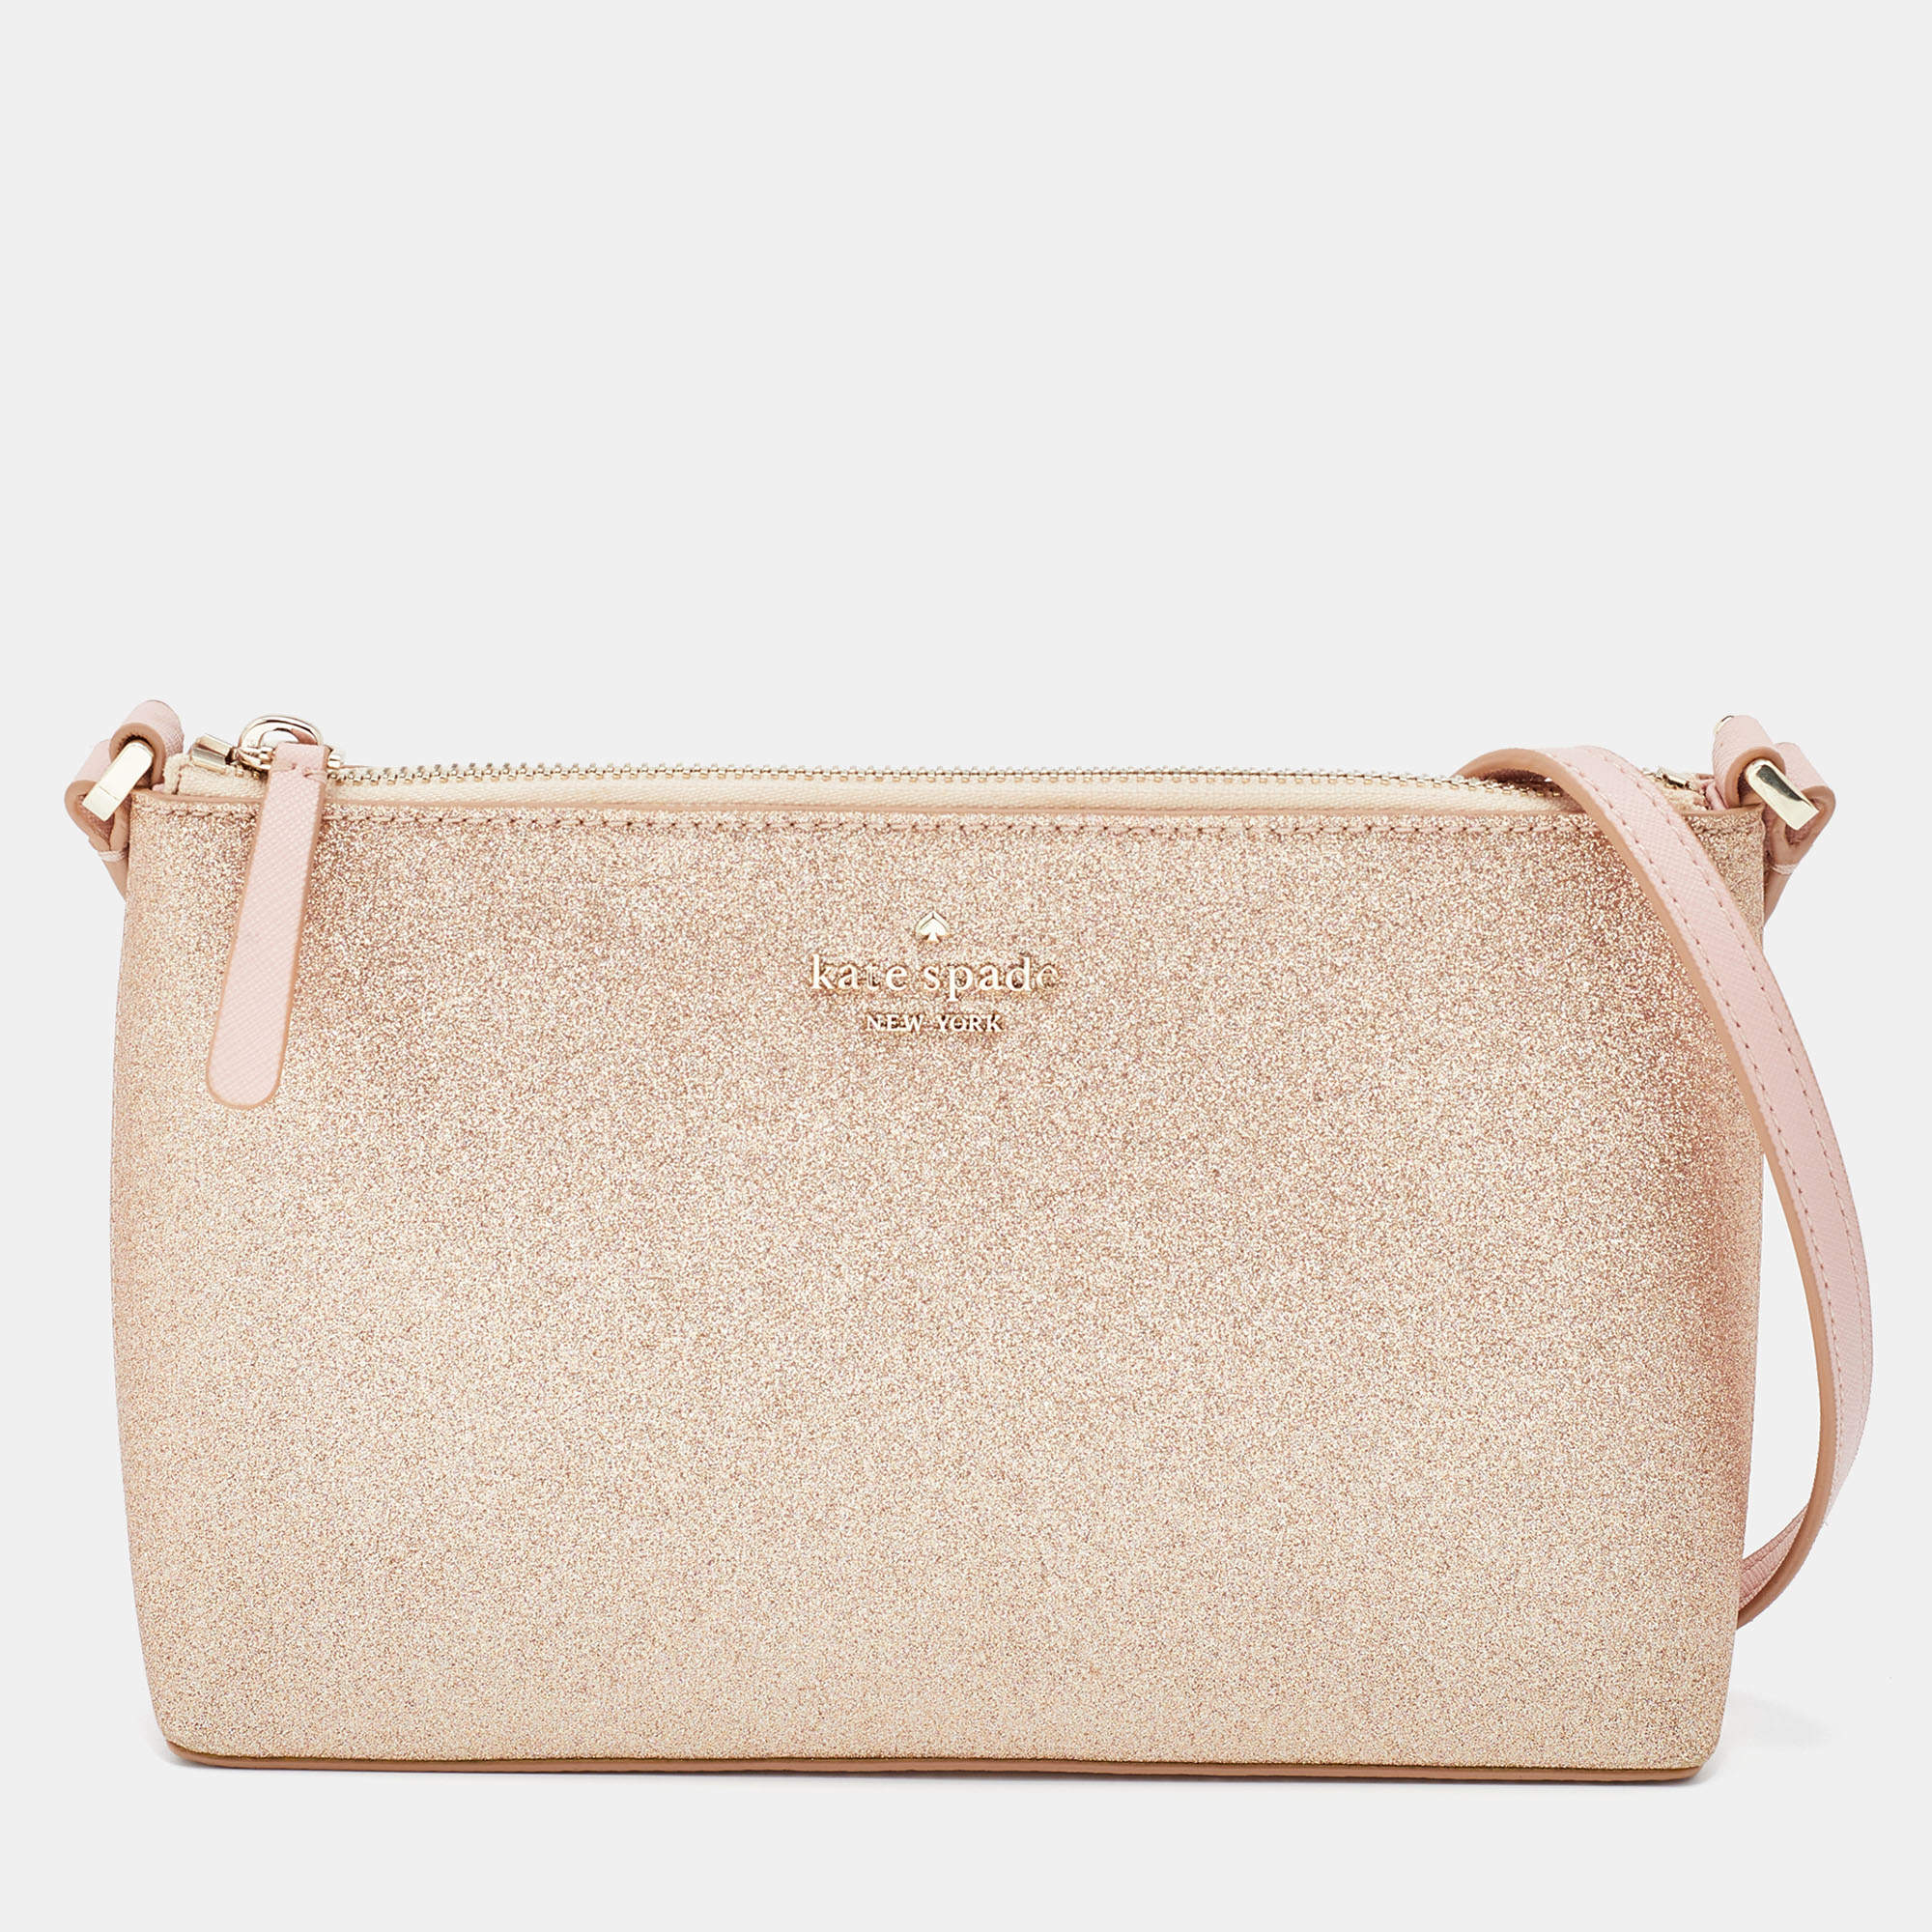 This Kate Spade mini bag is the cutest thing ever — and it's $110 off